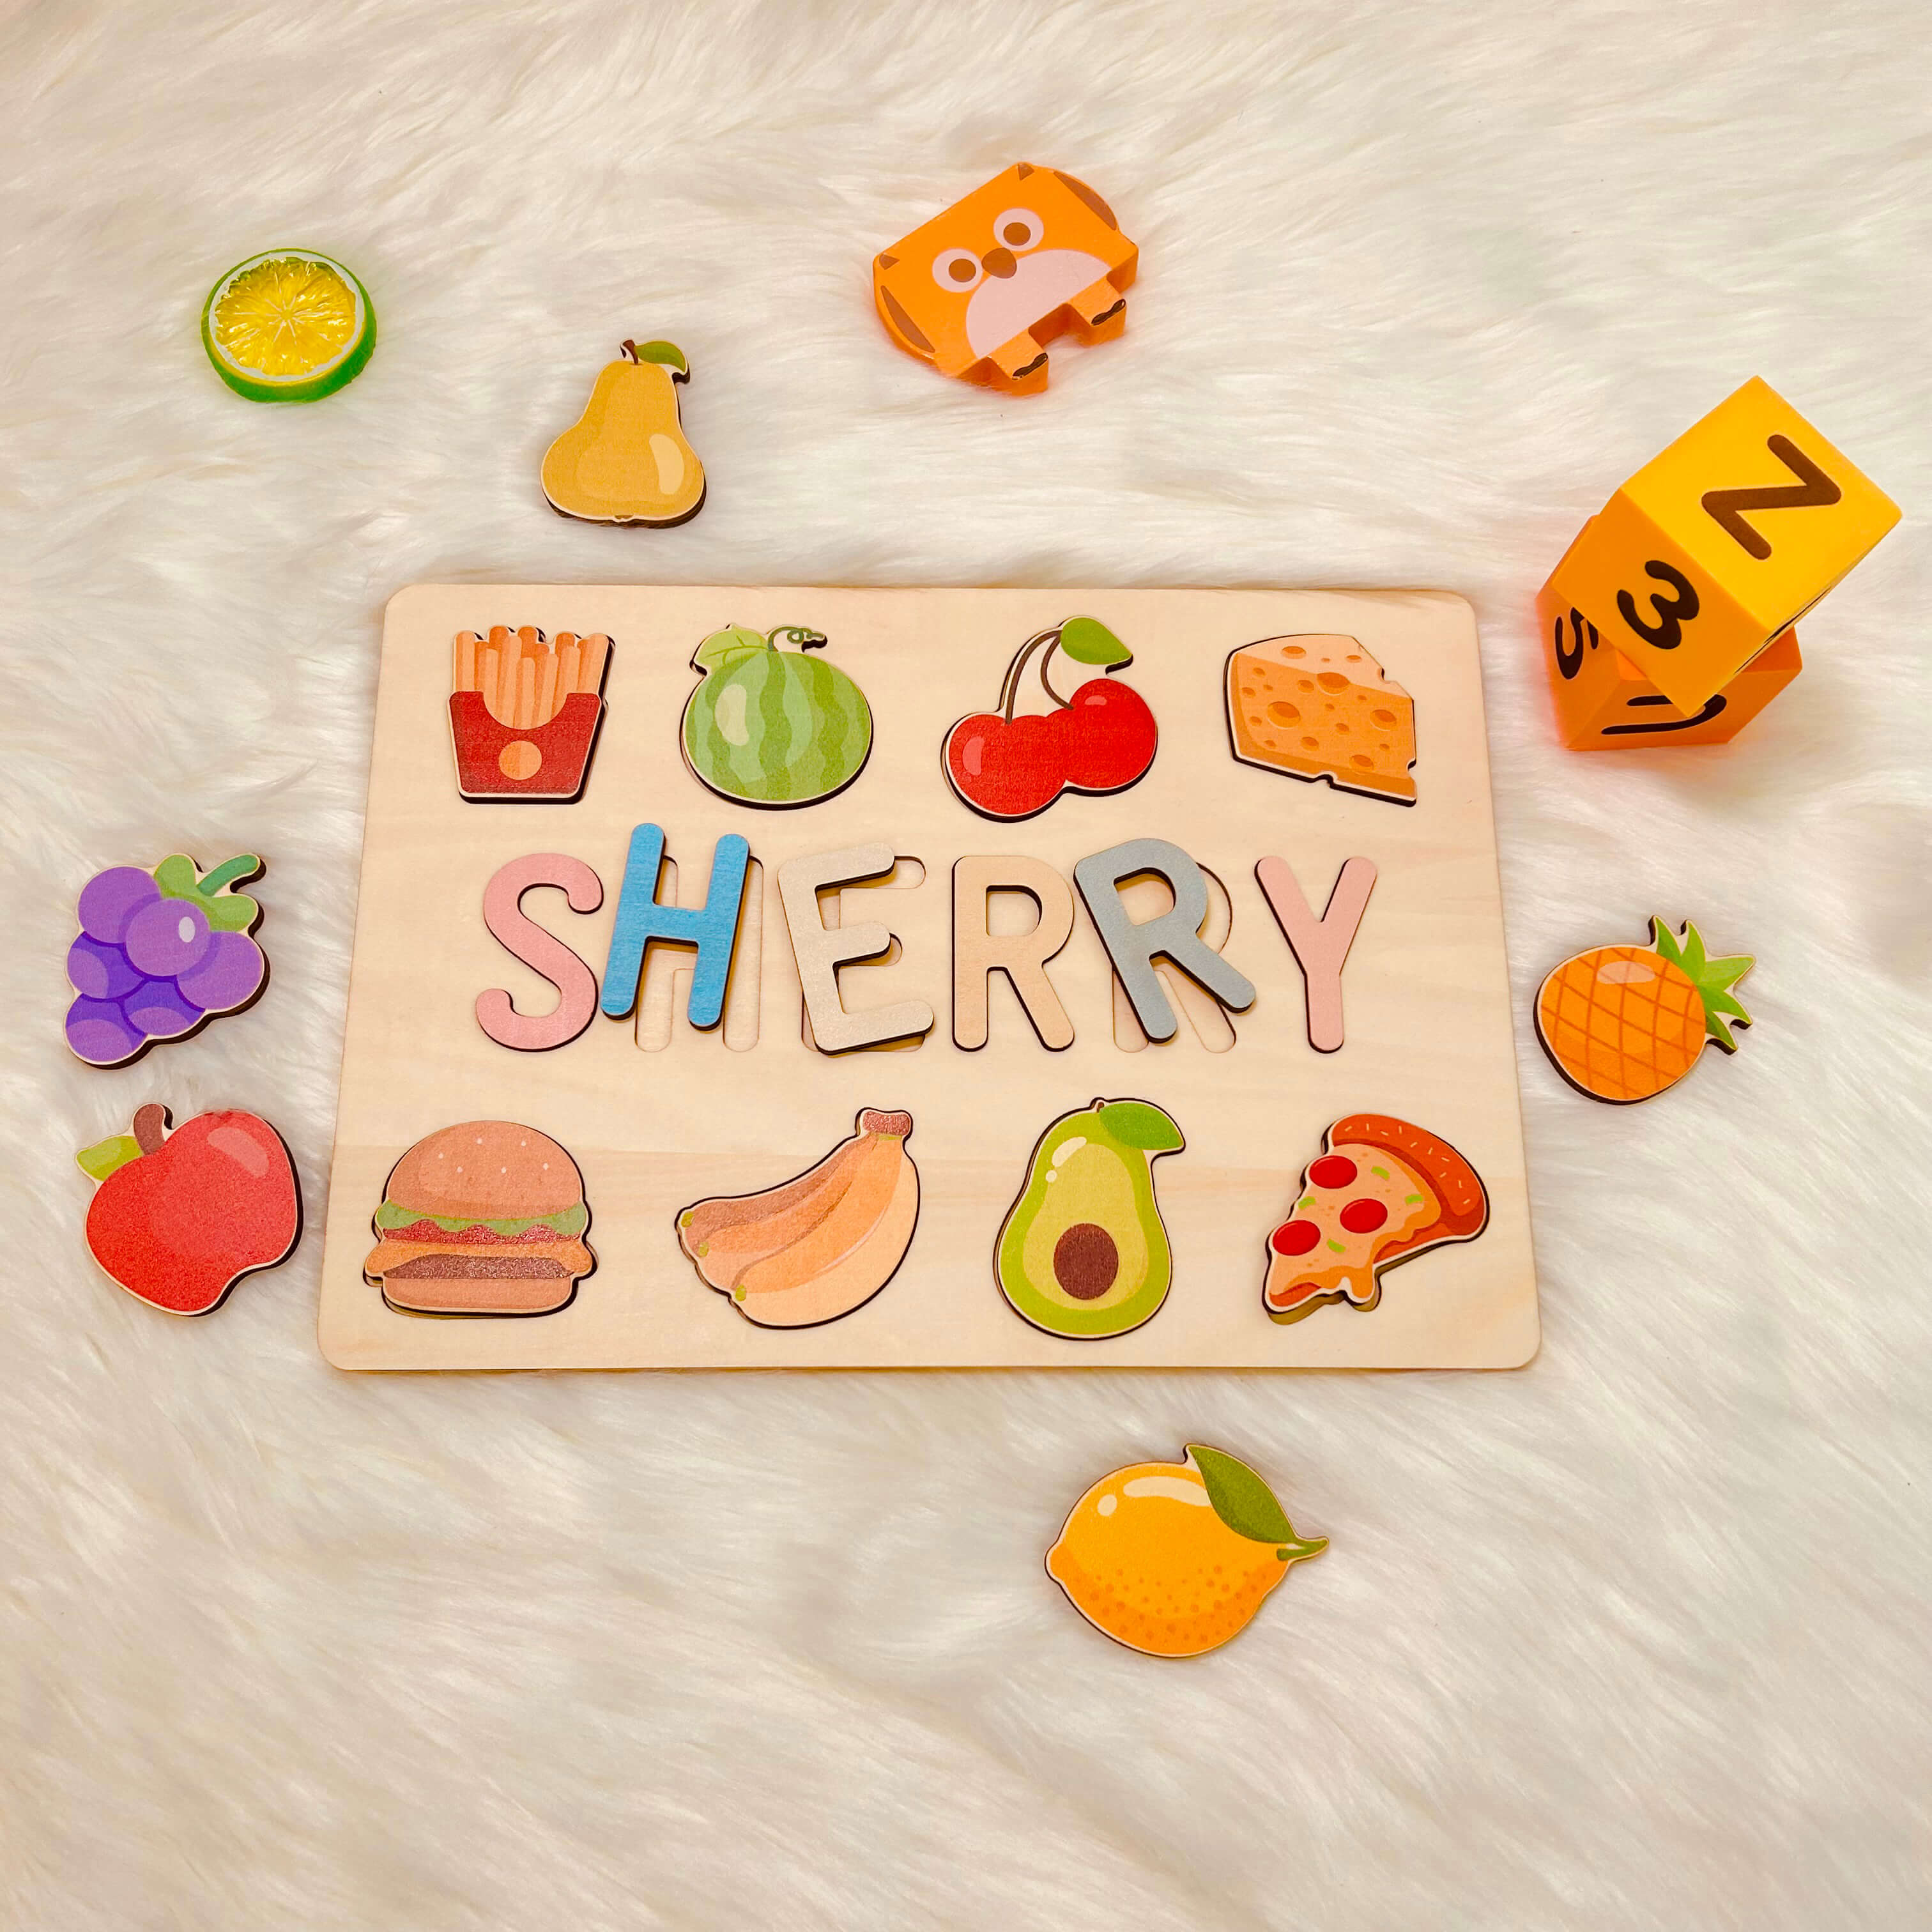 Personalized Wooden Baby Name Puzzle with Food Product Name: Personalized Wooden Baby Name Puzzle with Food Material: Eco-Friendly Plywood BasswoodLetters Available: Up to 10Engraving Messages: AvailableNon-Toxic: YesNon-Harmful: Yes Color: Pastel-boy; Pa